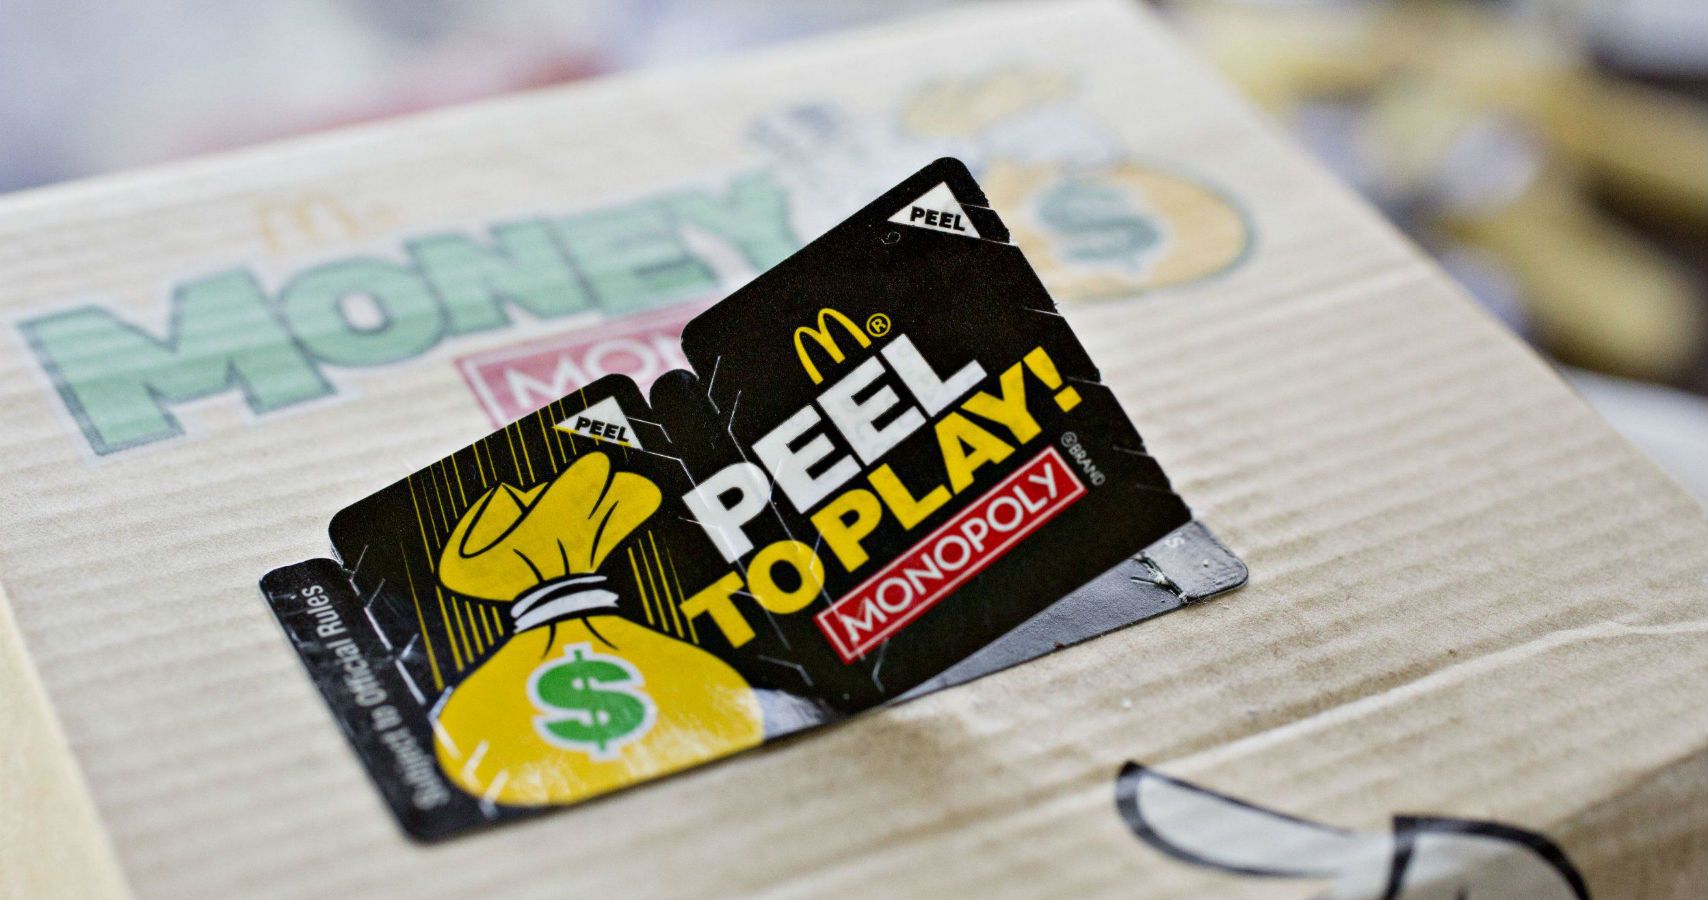 One Man Cheated At McDonald's Monopoly For Years And Stole